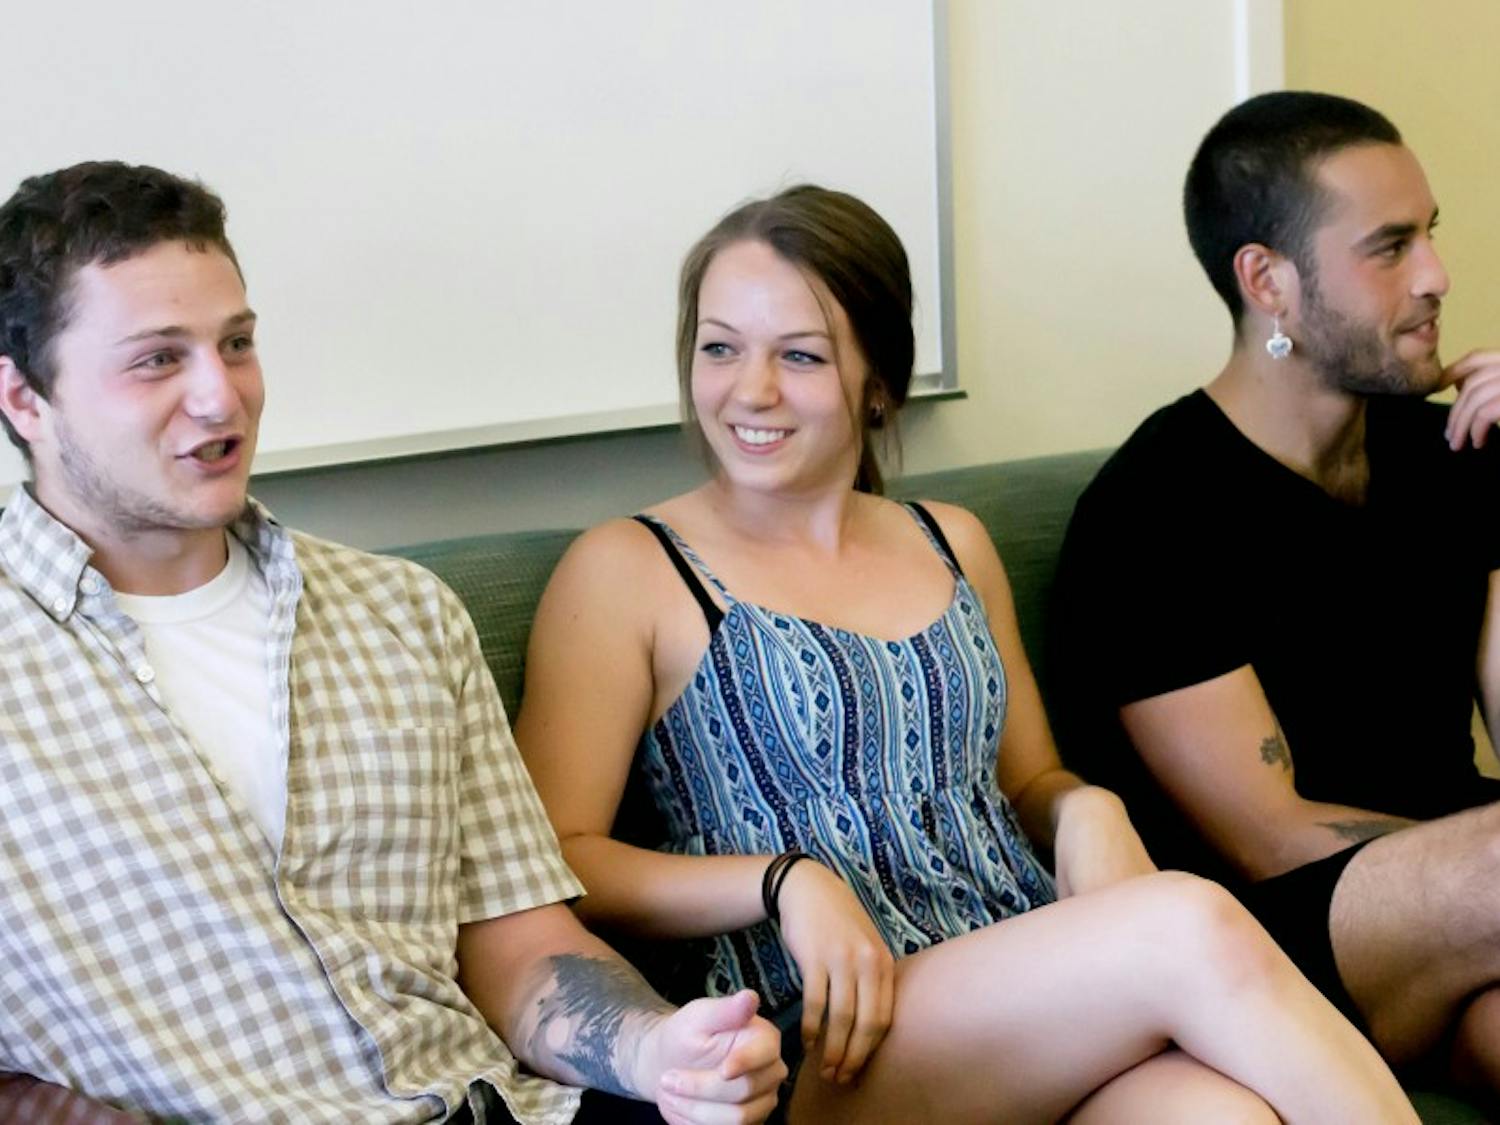 Live Free members Carter Kofman, Megan Dix and Cody Fearing (left to right) discuss plans for the upcoming year.